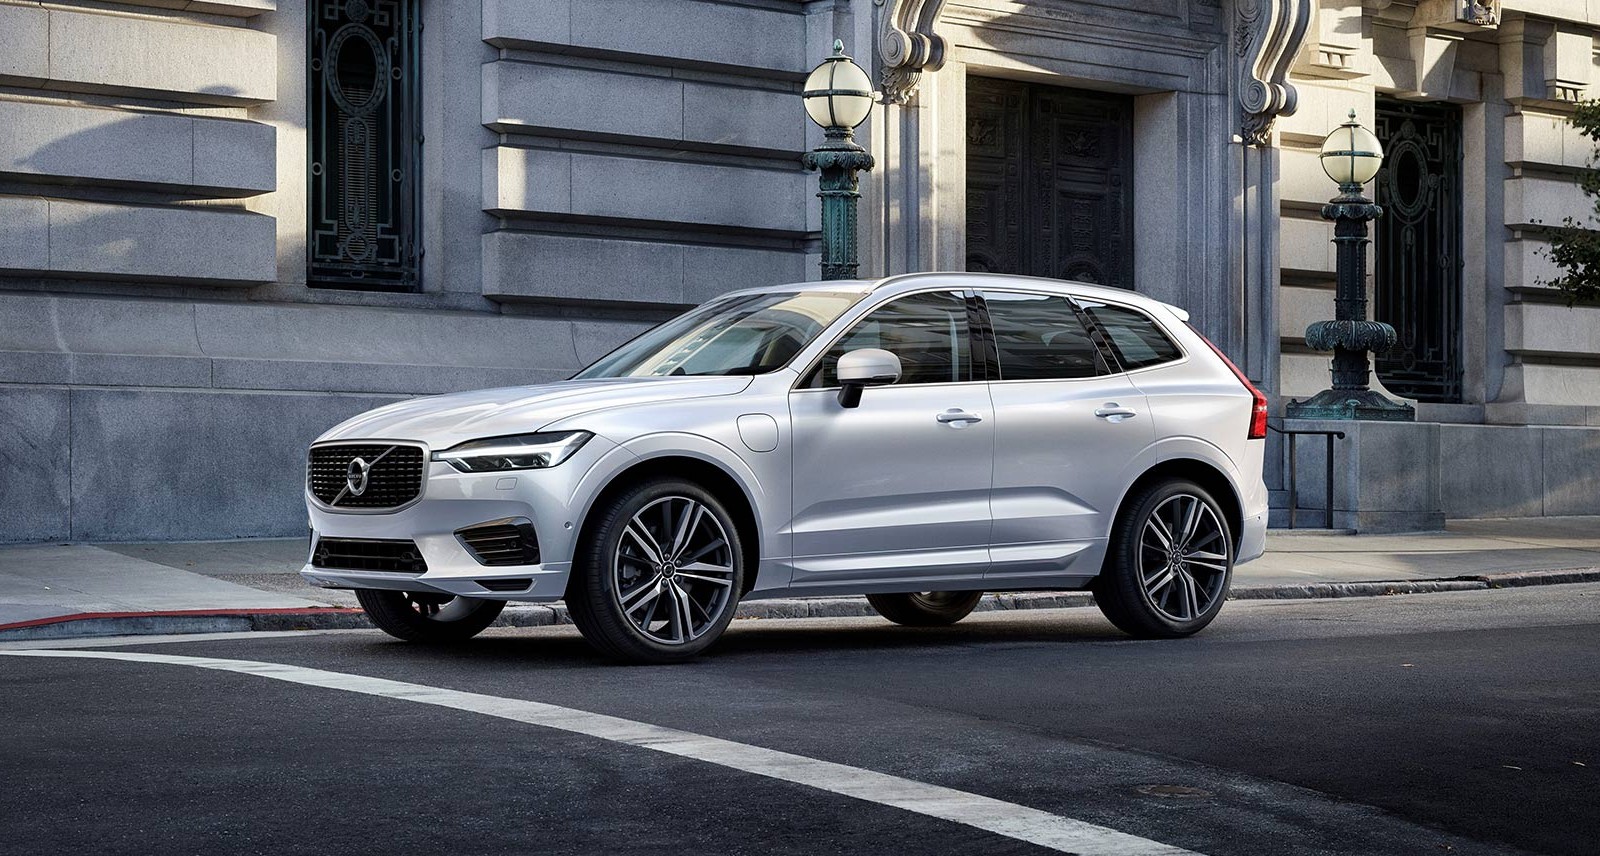 Volvo's All-New XC60 Is Right at Home in Barcelona - and in Your Driveway